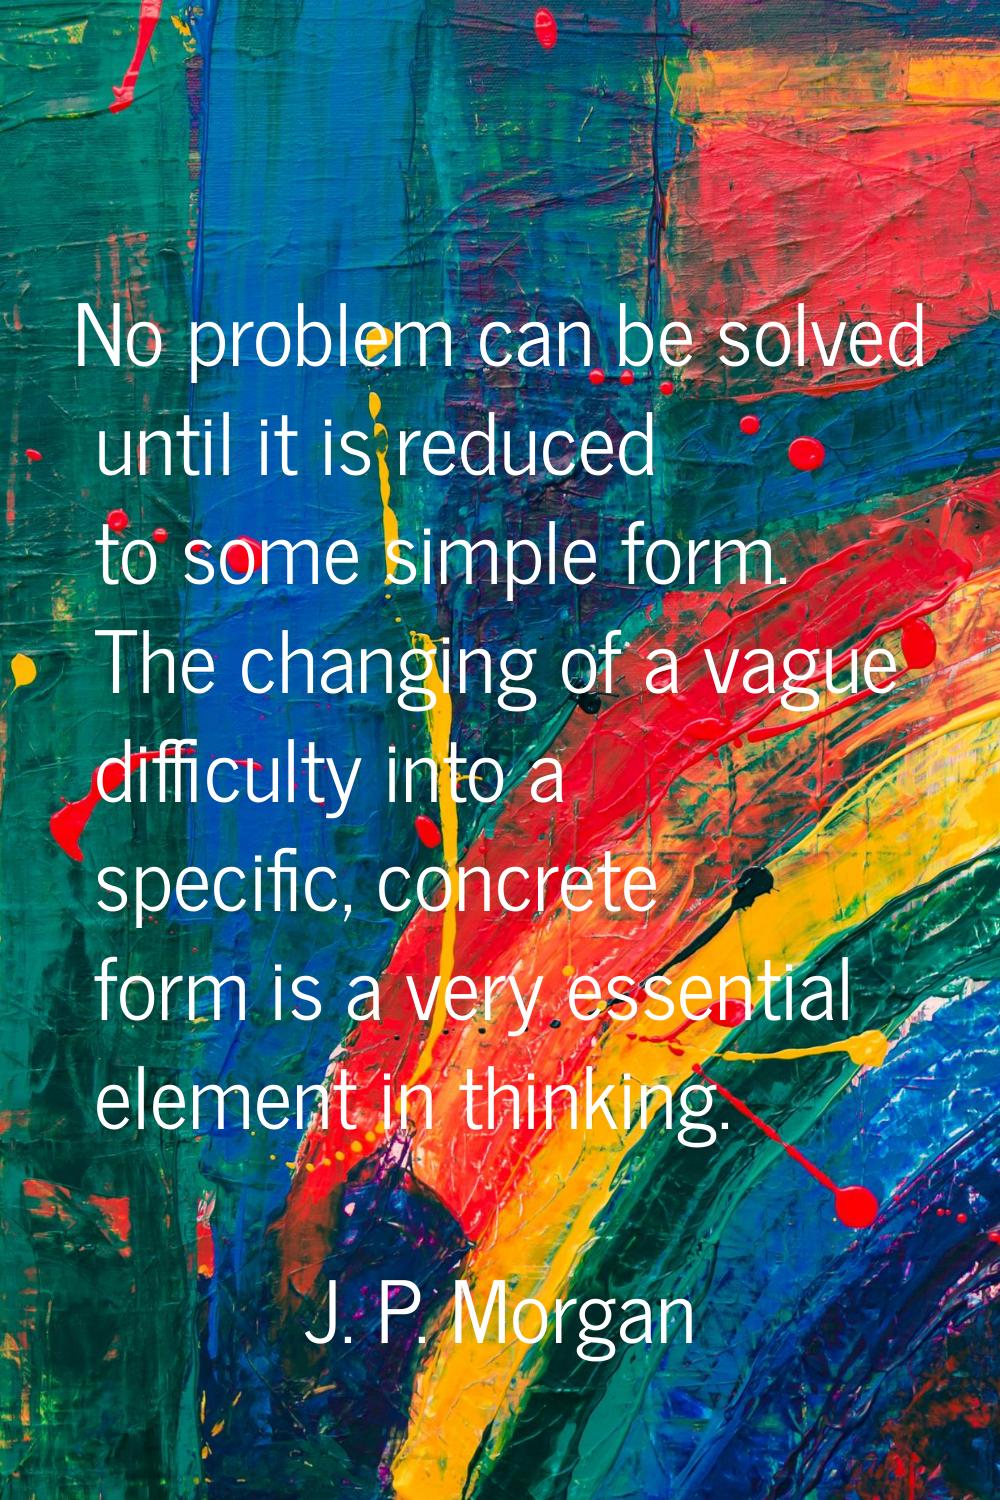 No problem can be solved until it is reduced to some simple form. The changing of a vague difficult